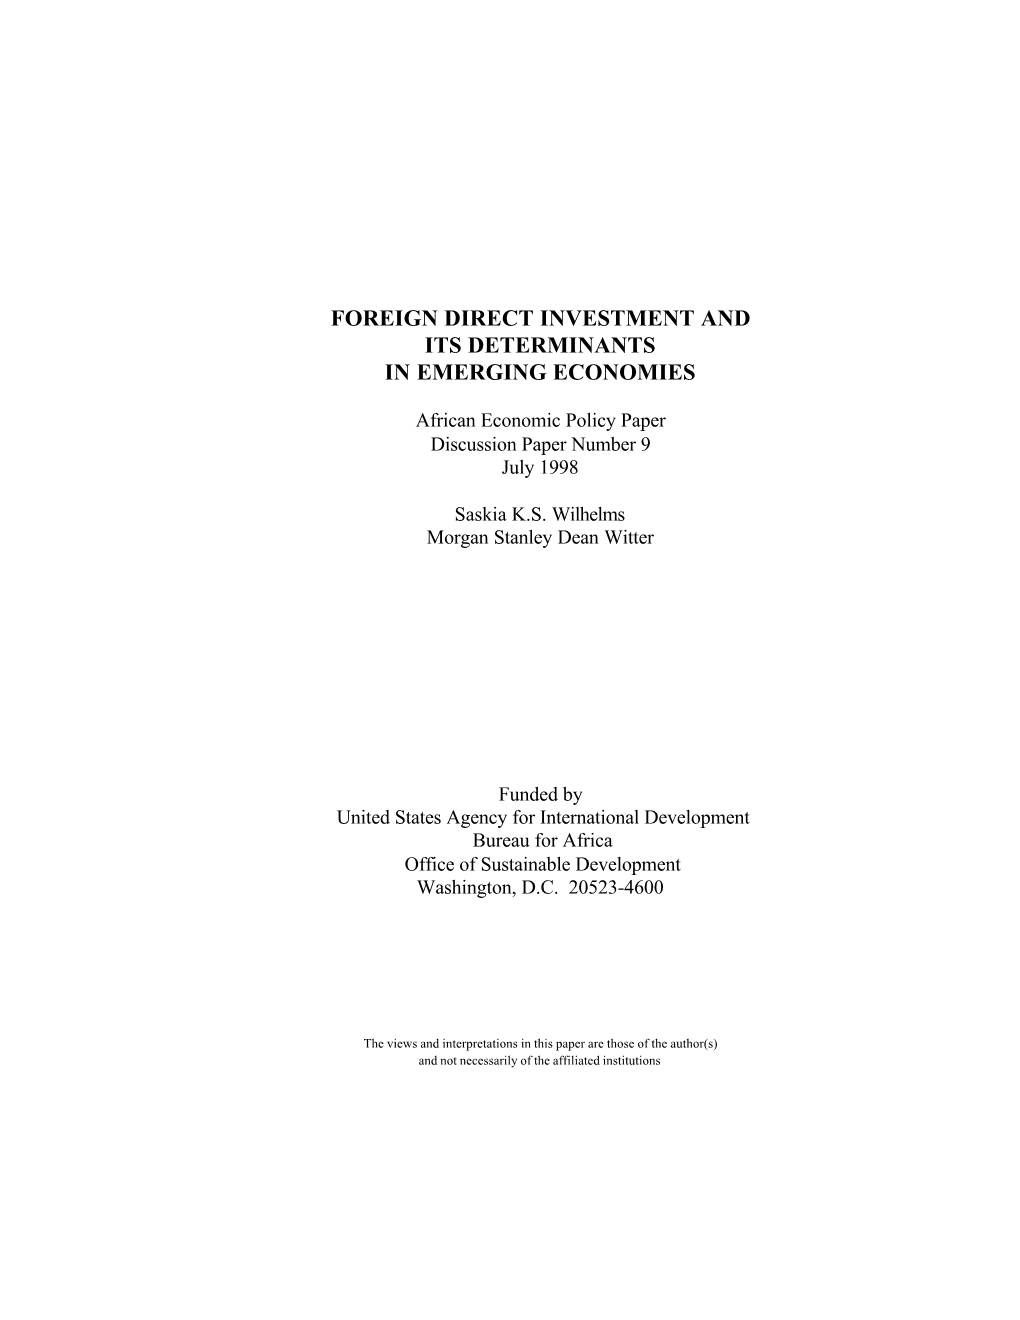 Foreign Direct Investment and Its Determinants in Emerging Economies